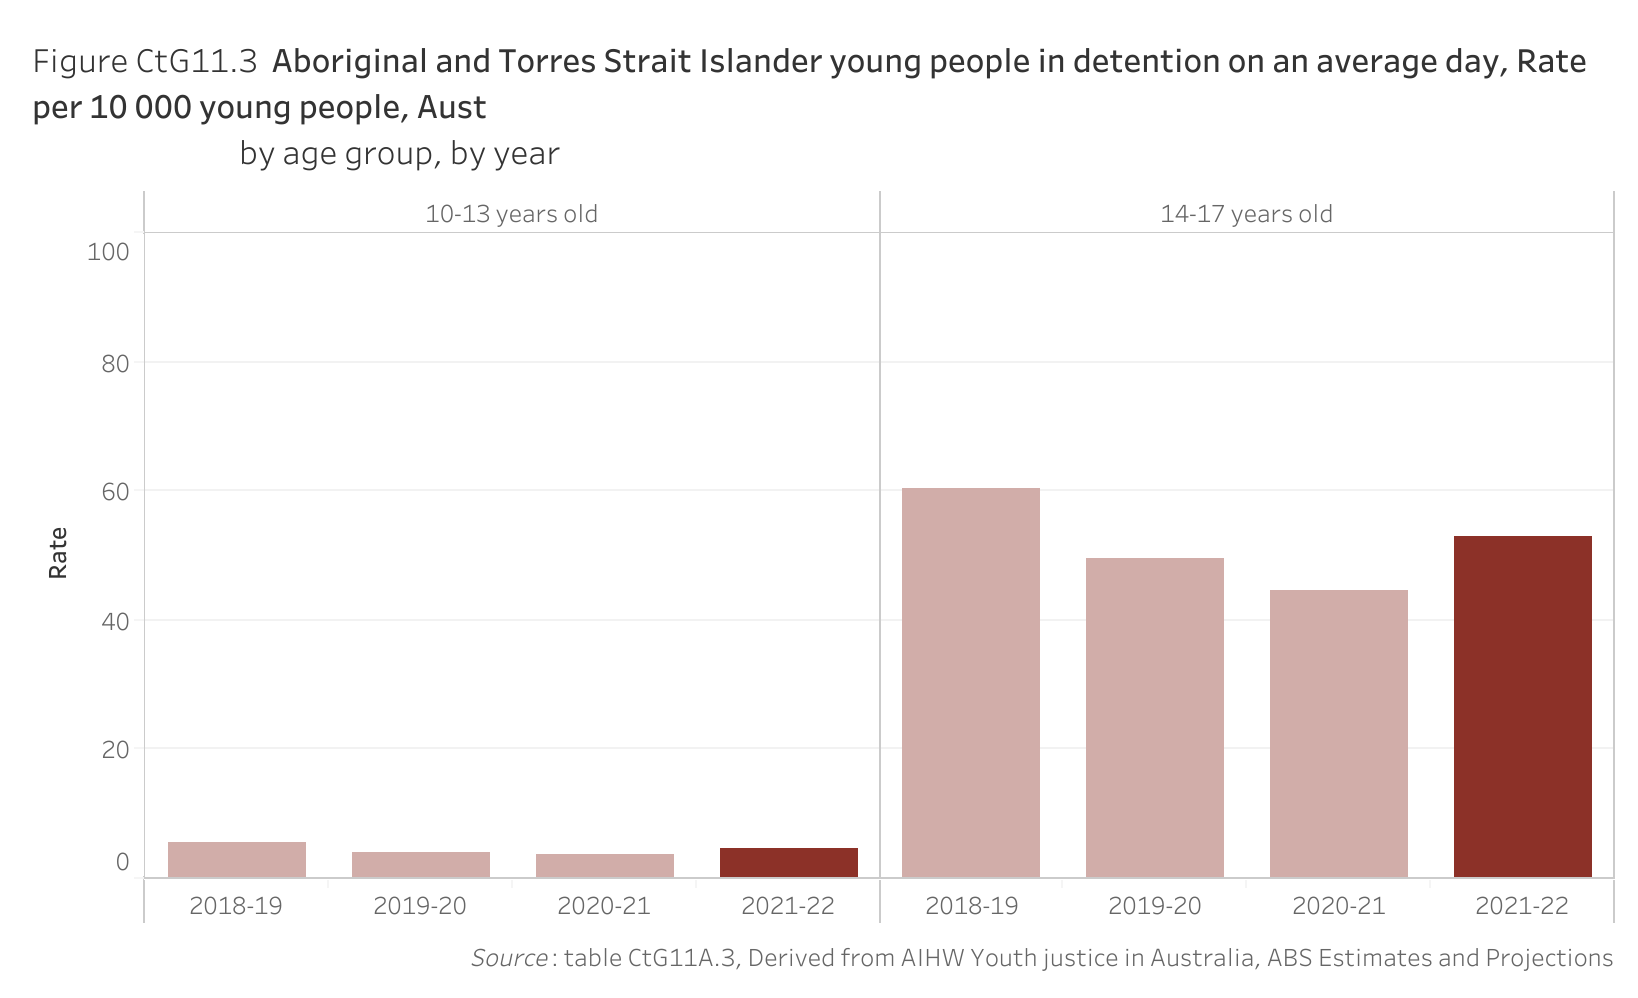 Figure CtG11.3 shows Aboriginal and Torres Strait Islander young people in detention on an average day, Rate per 10 000 young people, Australia, by age group, by year. More details can be found within the text near this image.